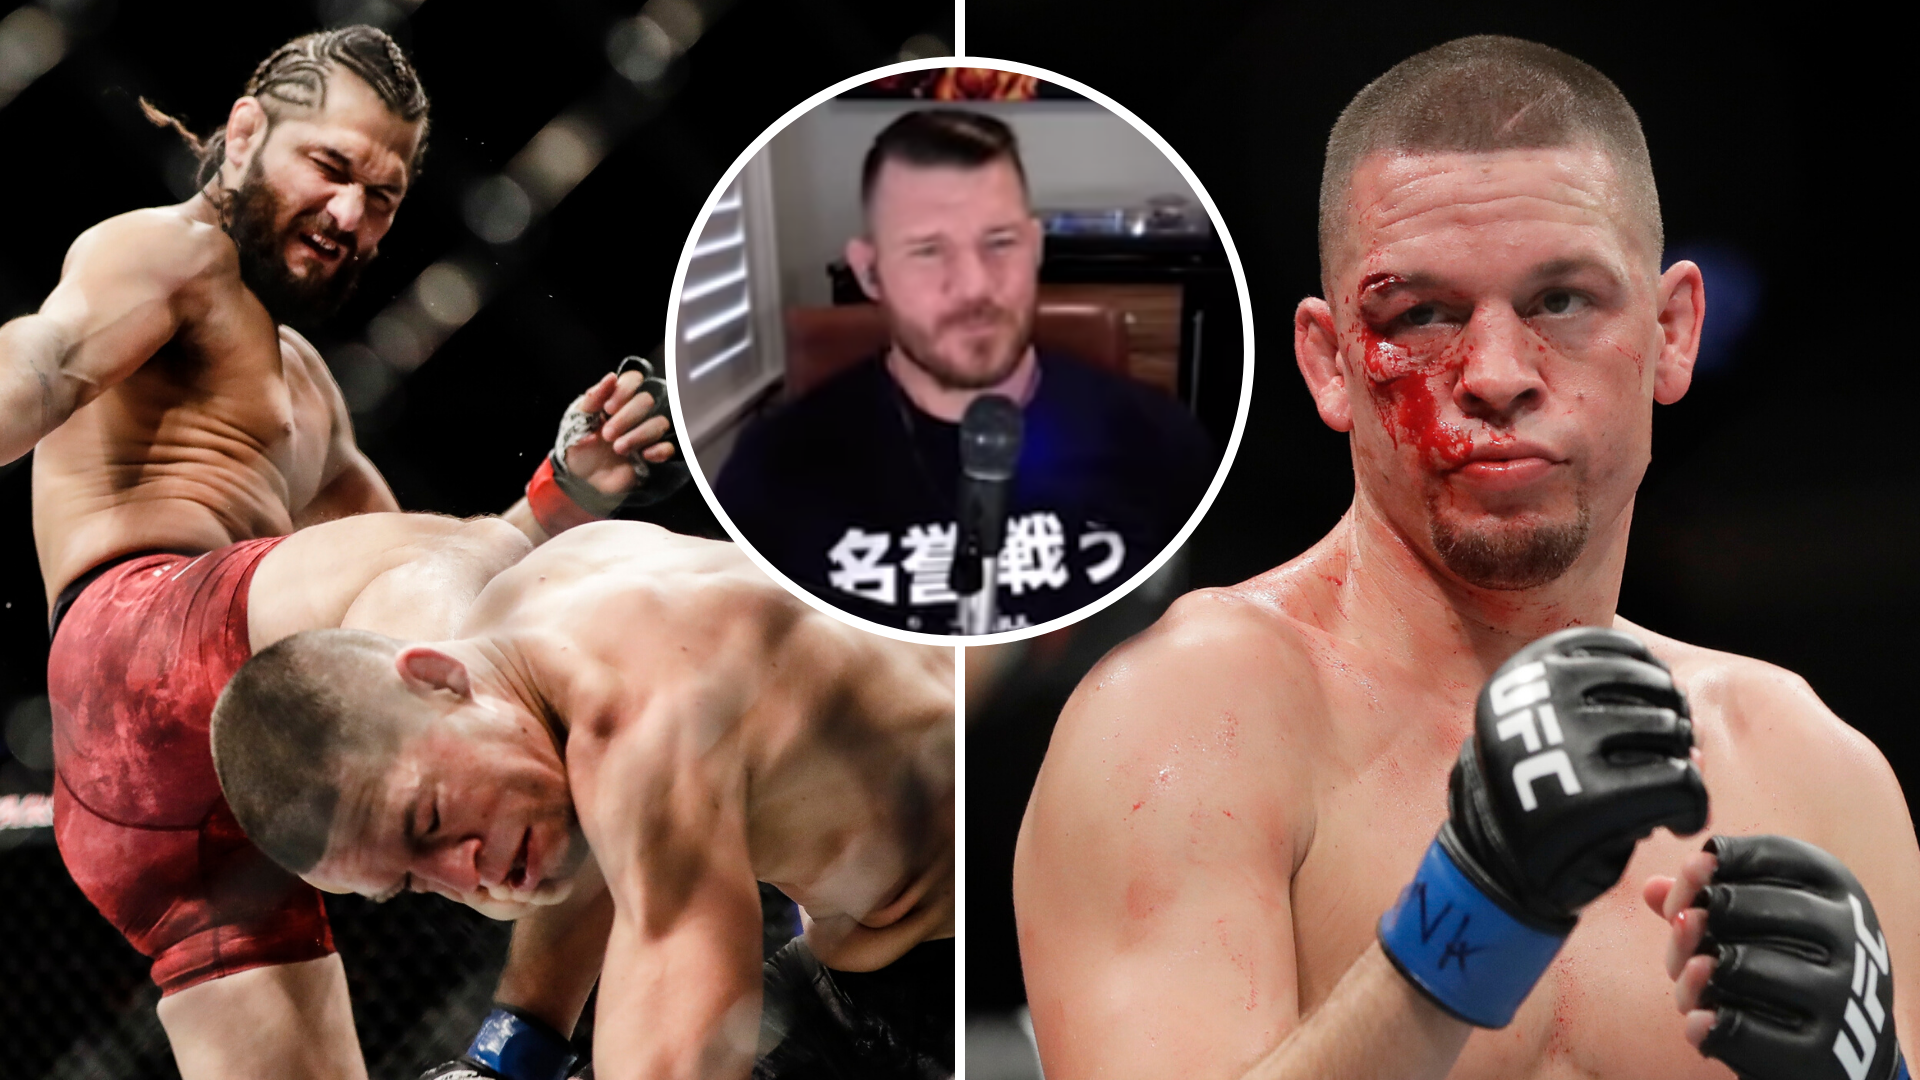 Michael Bisping Launches Scathing Attack On Nate Diaz - Jorge Masvidal Nate Diaz - HD Wallpaper 